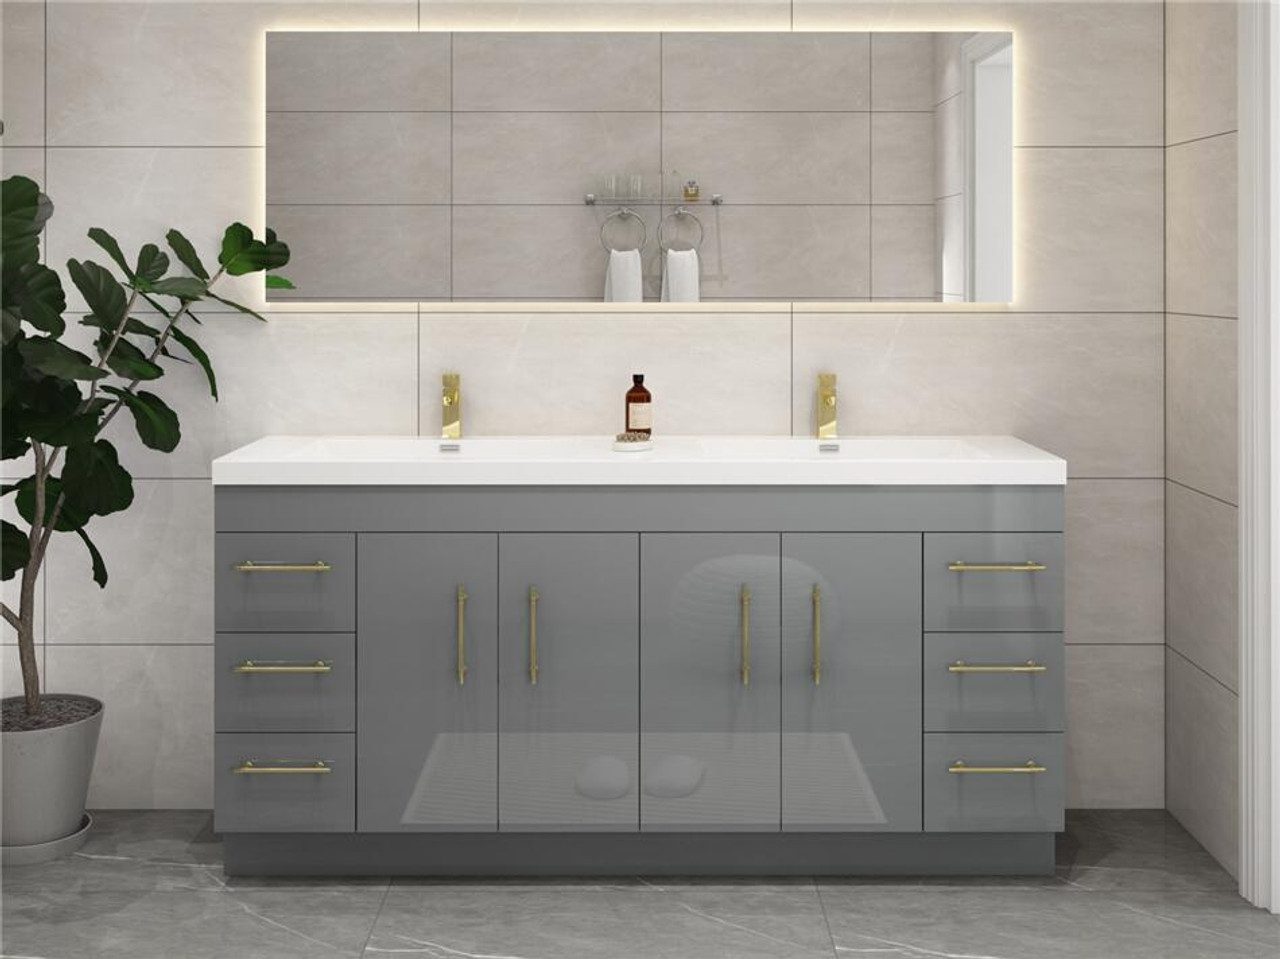 The Elsa Freestanding Vanity is a popular freestanding vanity. Note that it does not require wall-mounts as it is standing freely on its base.